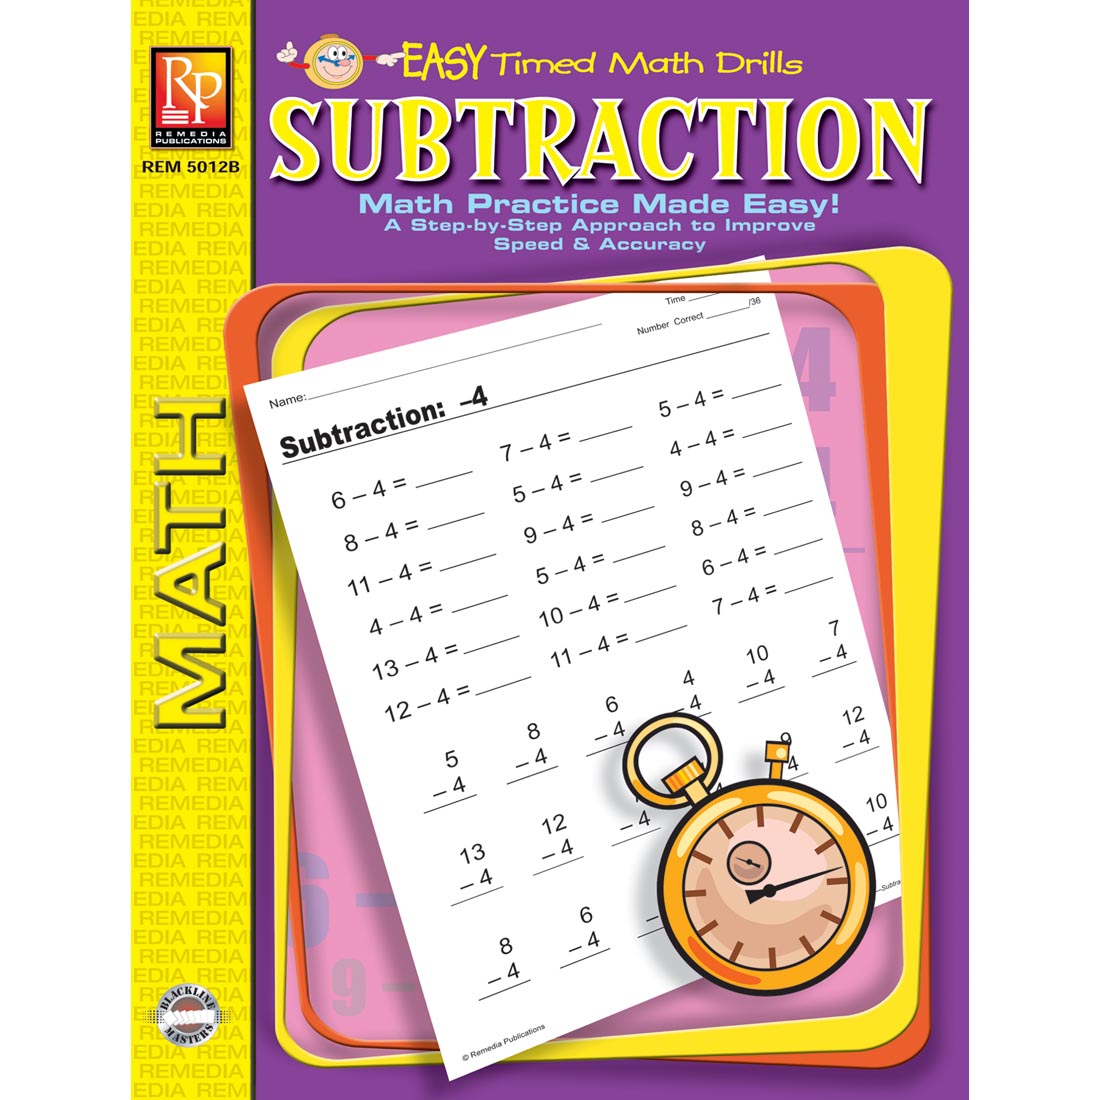 Easy Timed Math Drills Subtraction